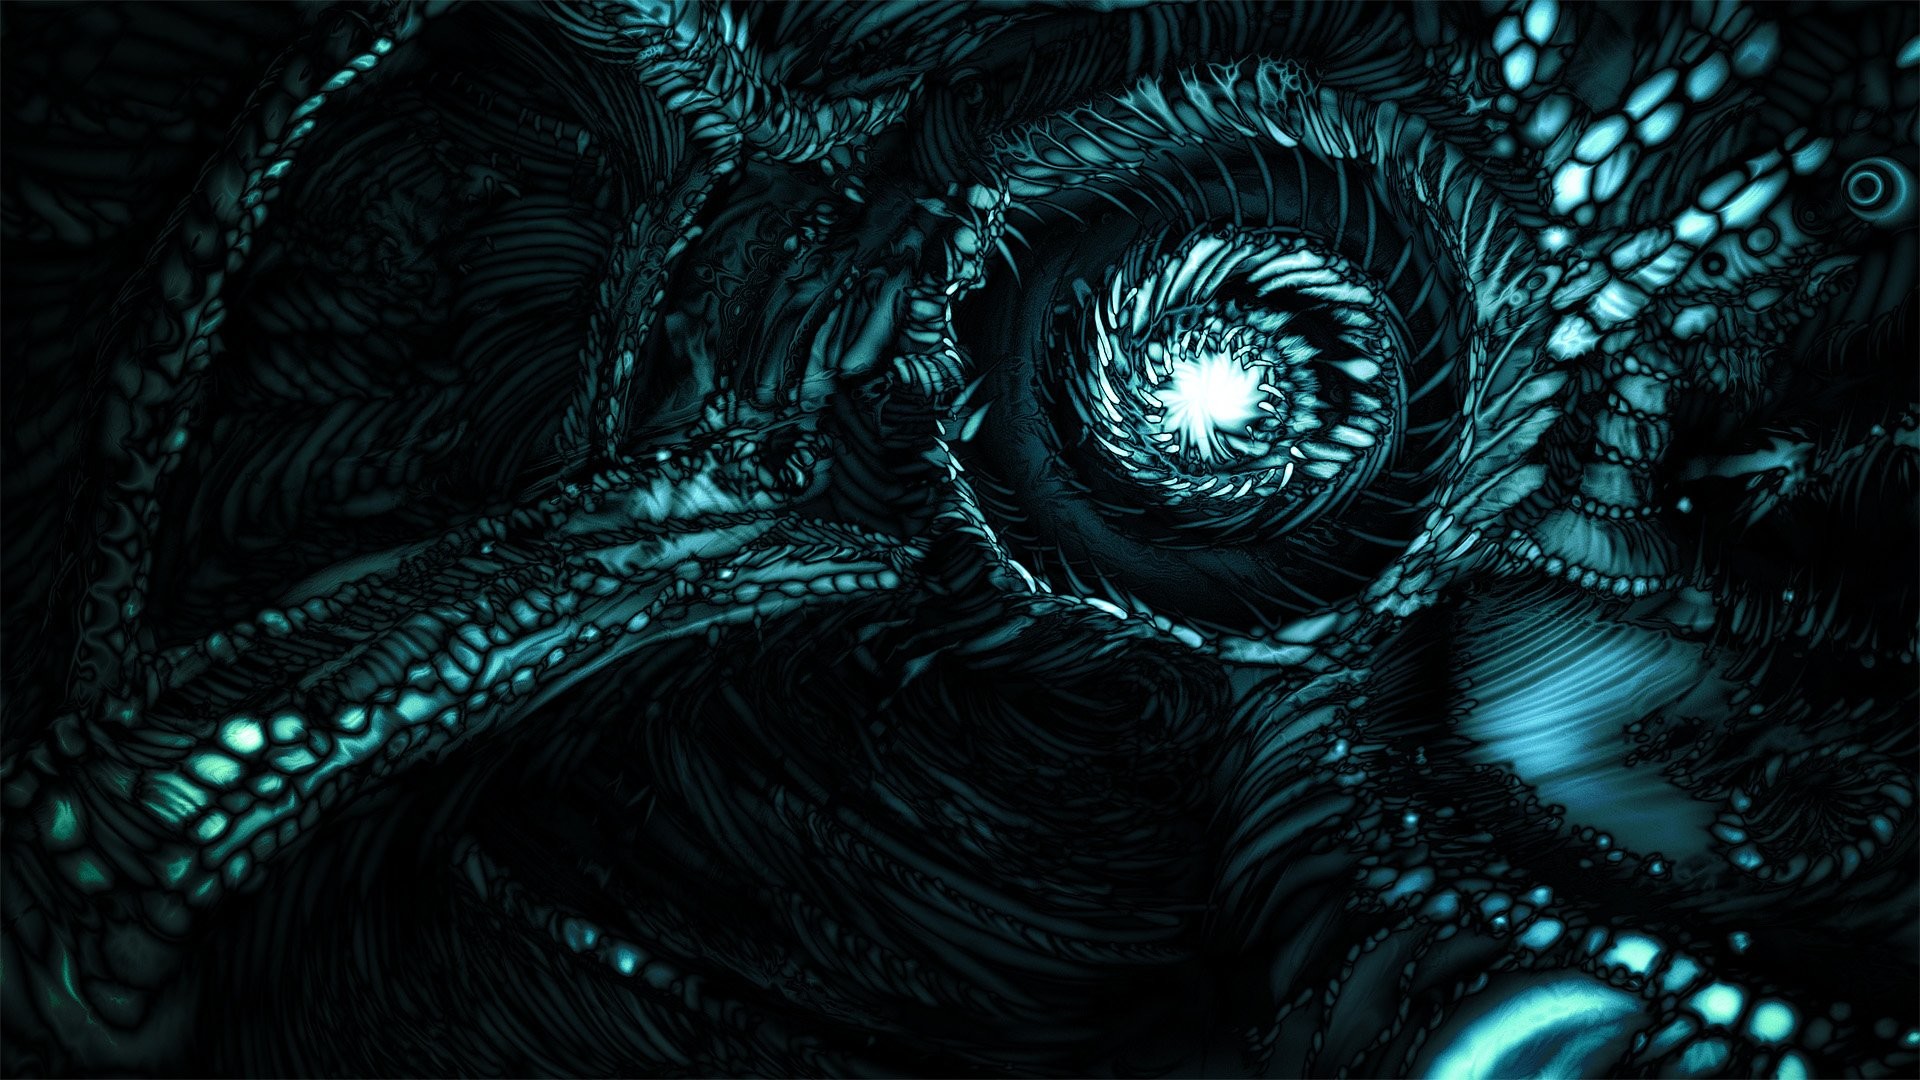 1920x1080 Cool desktop backgrounds awesome space fantasy.